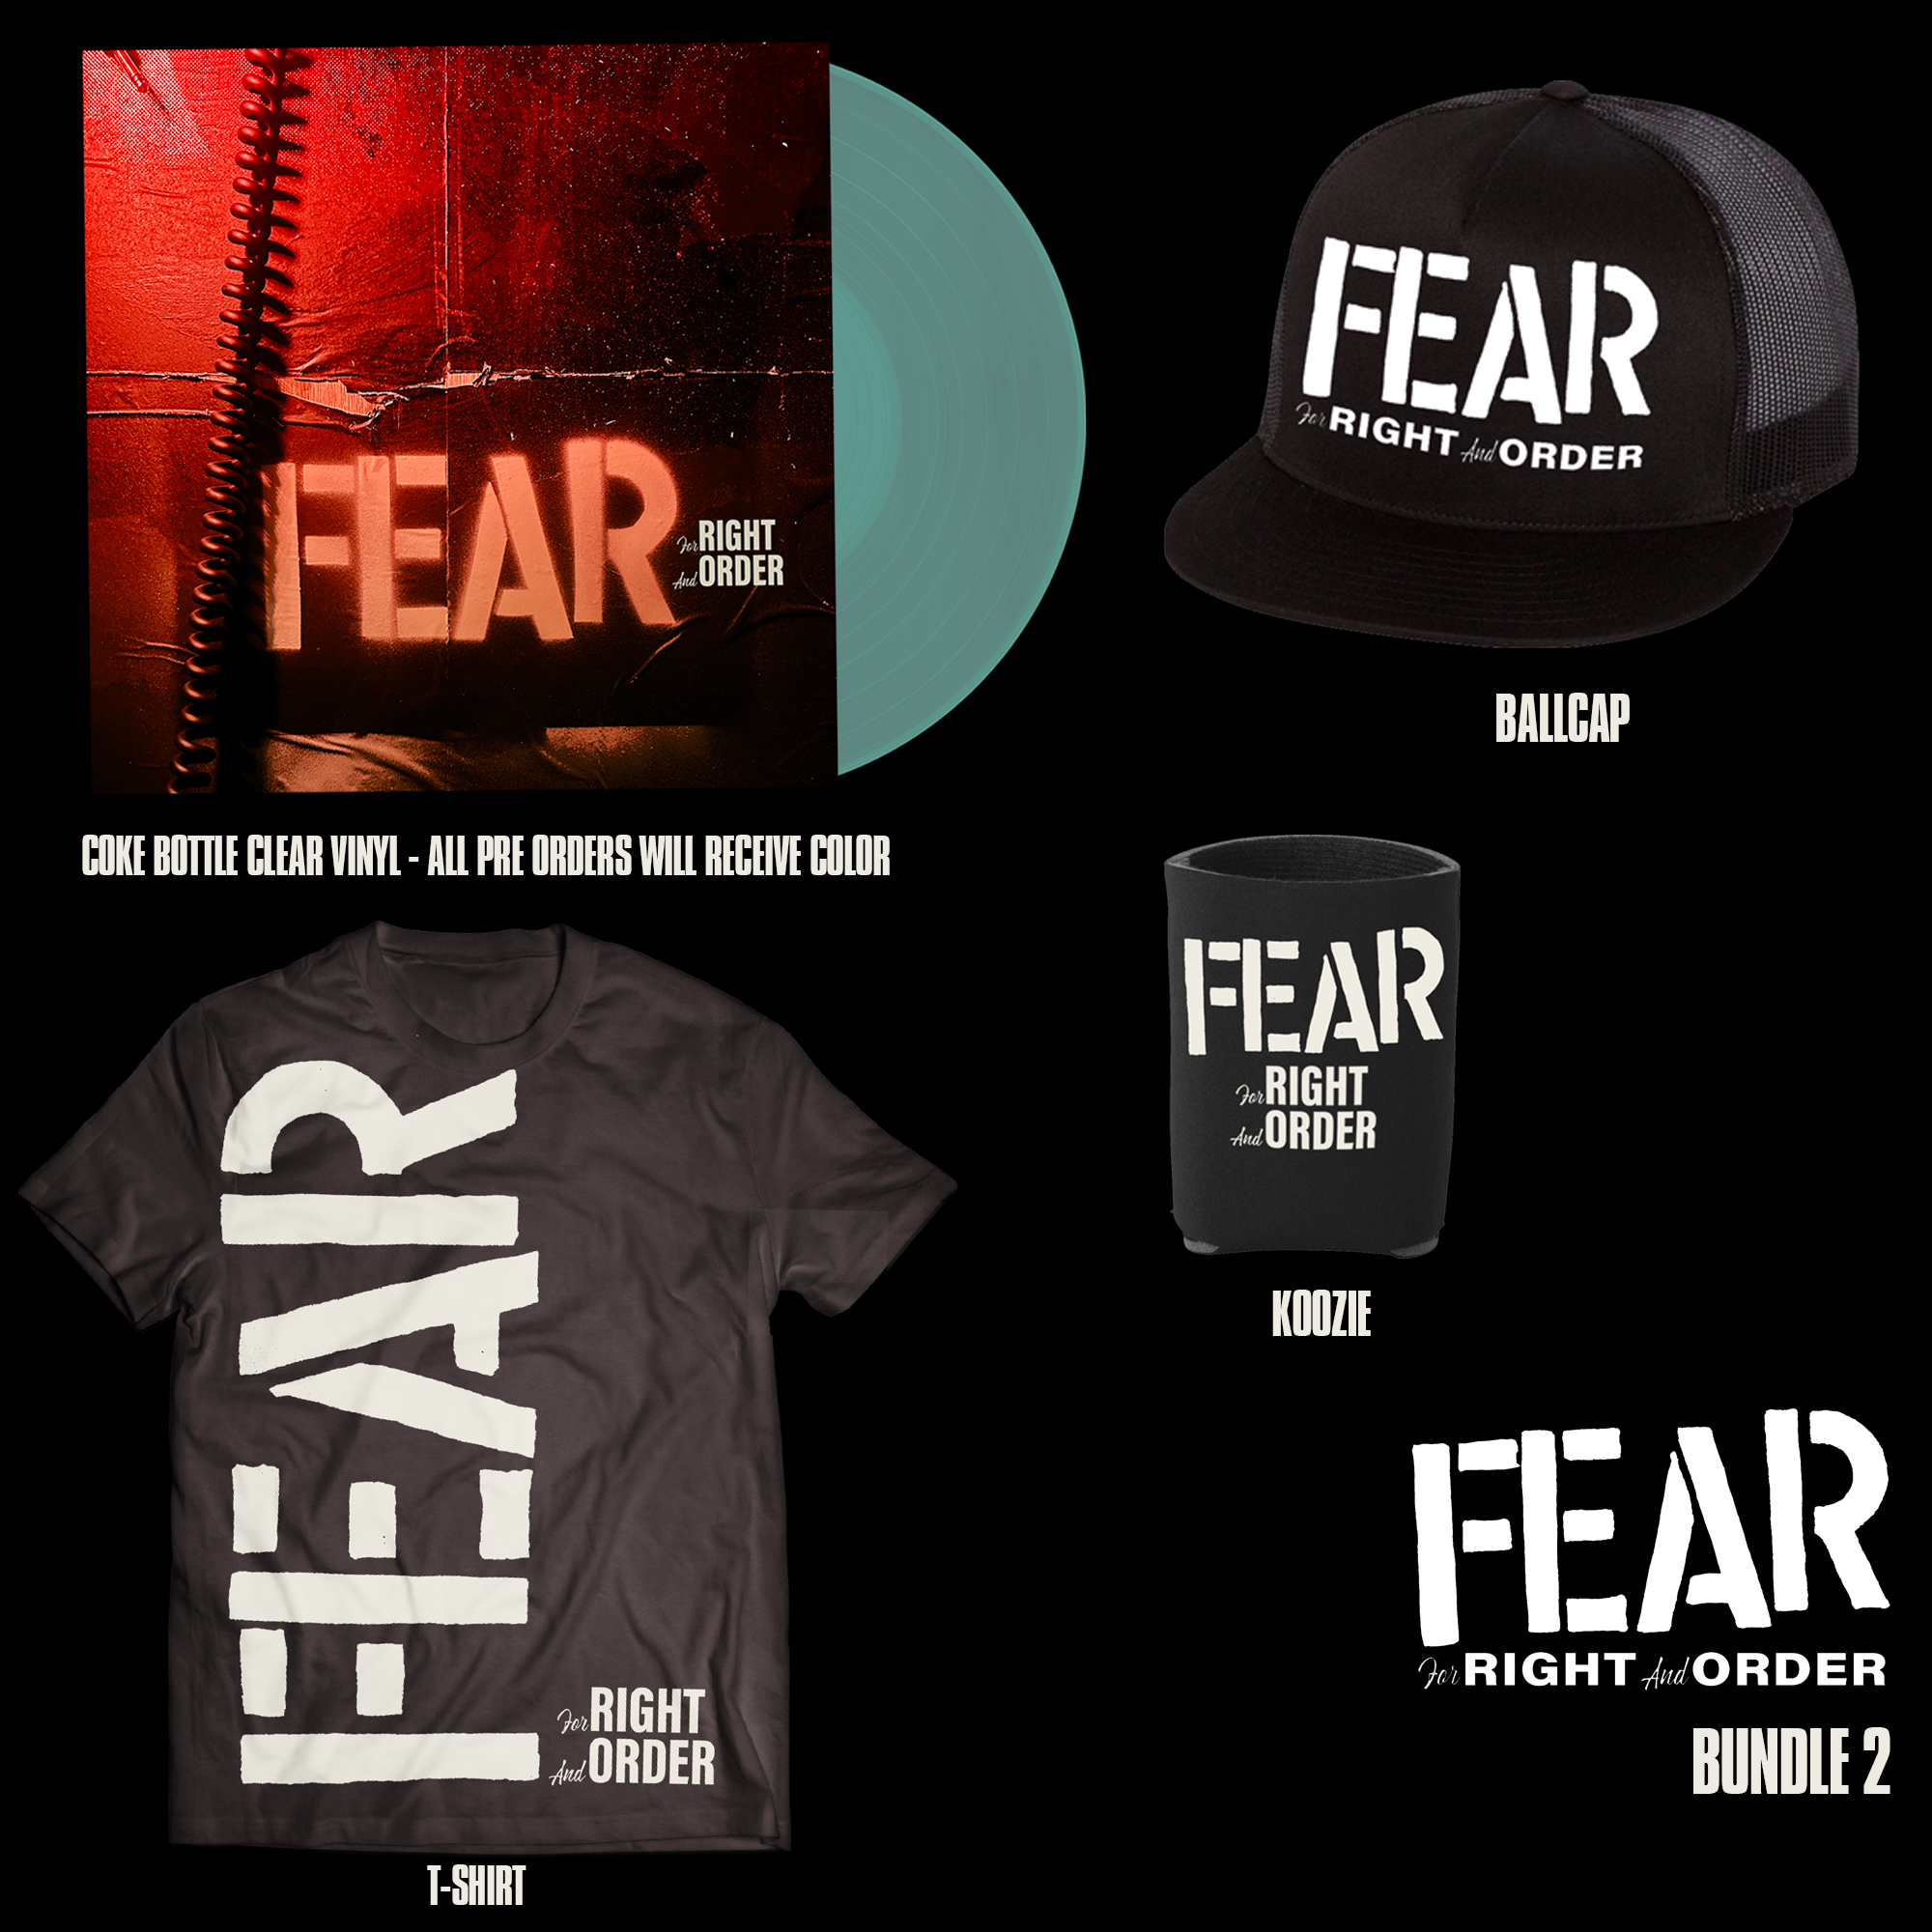 FEAR "FOR RIGHT AND ORDER" LIMITED EDITION DELUXE BUNDLE 2